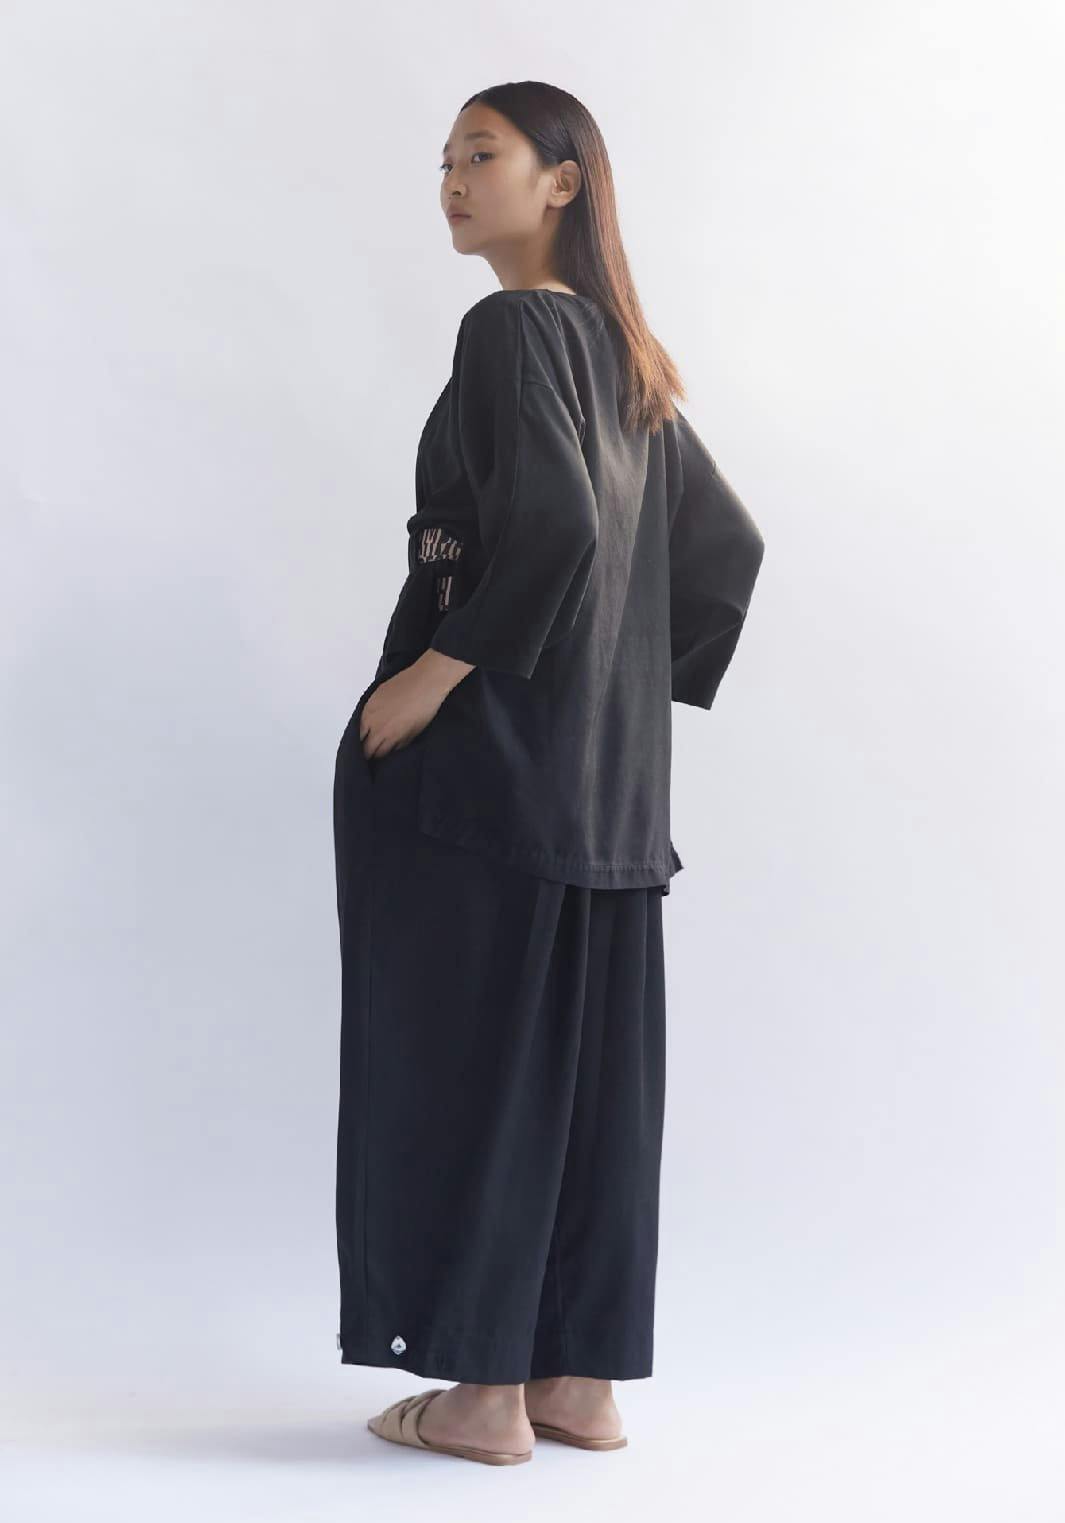 Three-quarter sleeve blouse to gather: Item 006 Black, a product by Studio cumbre